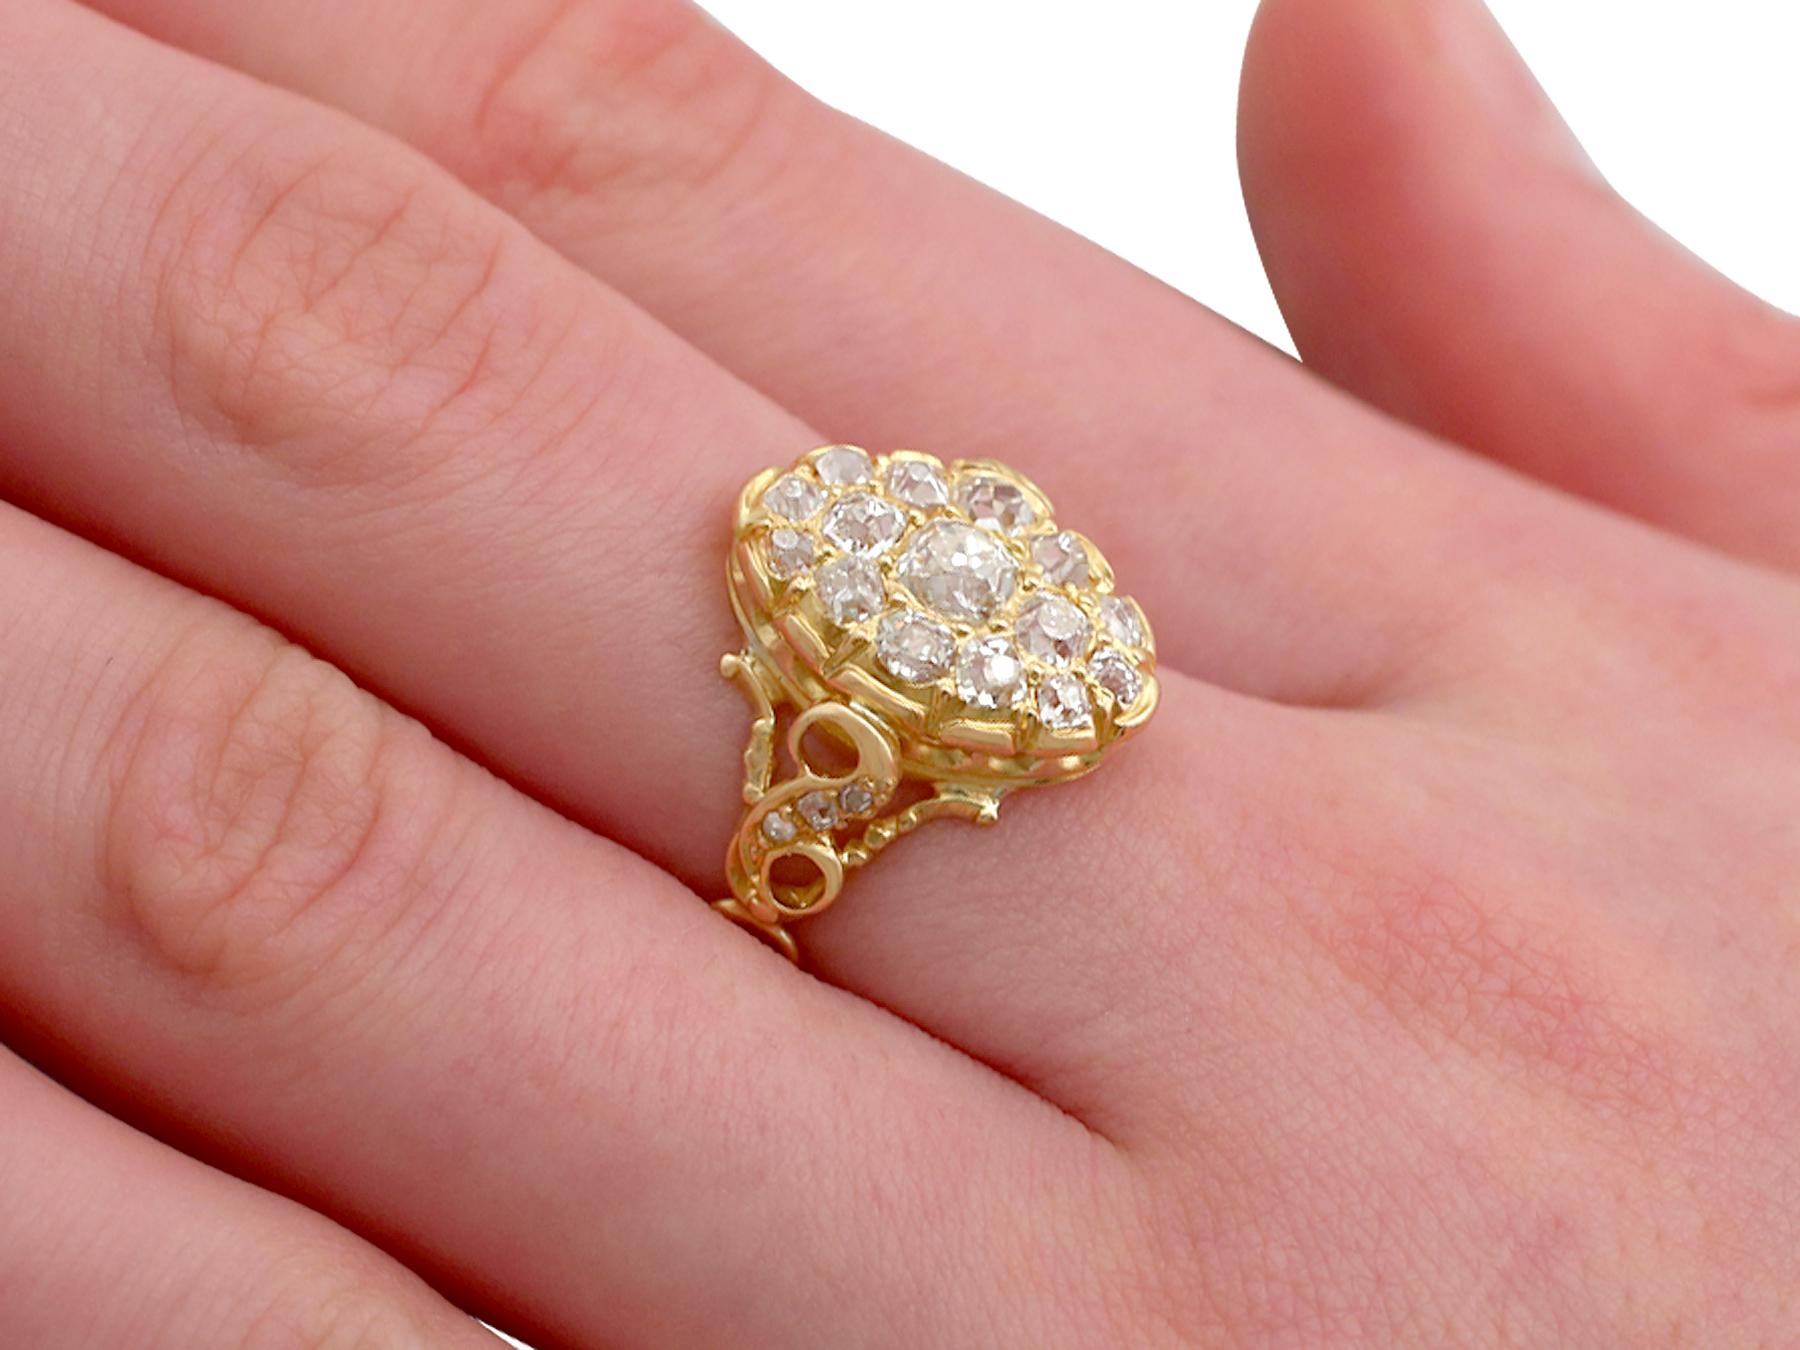 1870s Antique Victorian 1.51 Carat Diamond and Yellow Gold Cocktail Ring 4